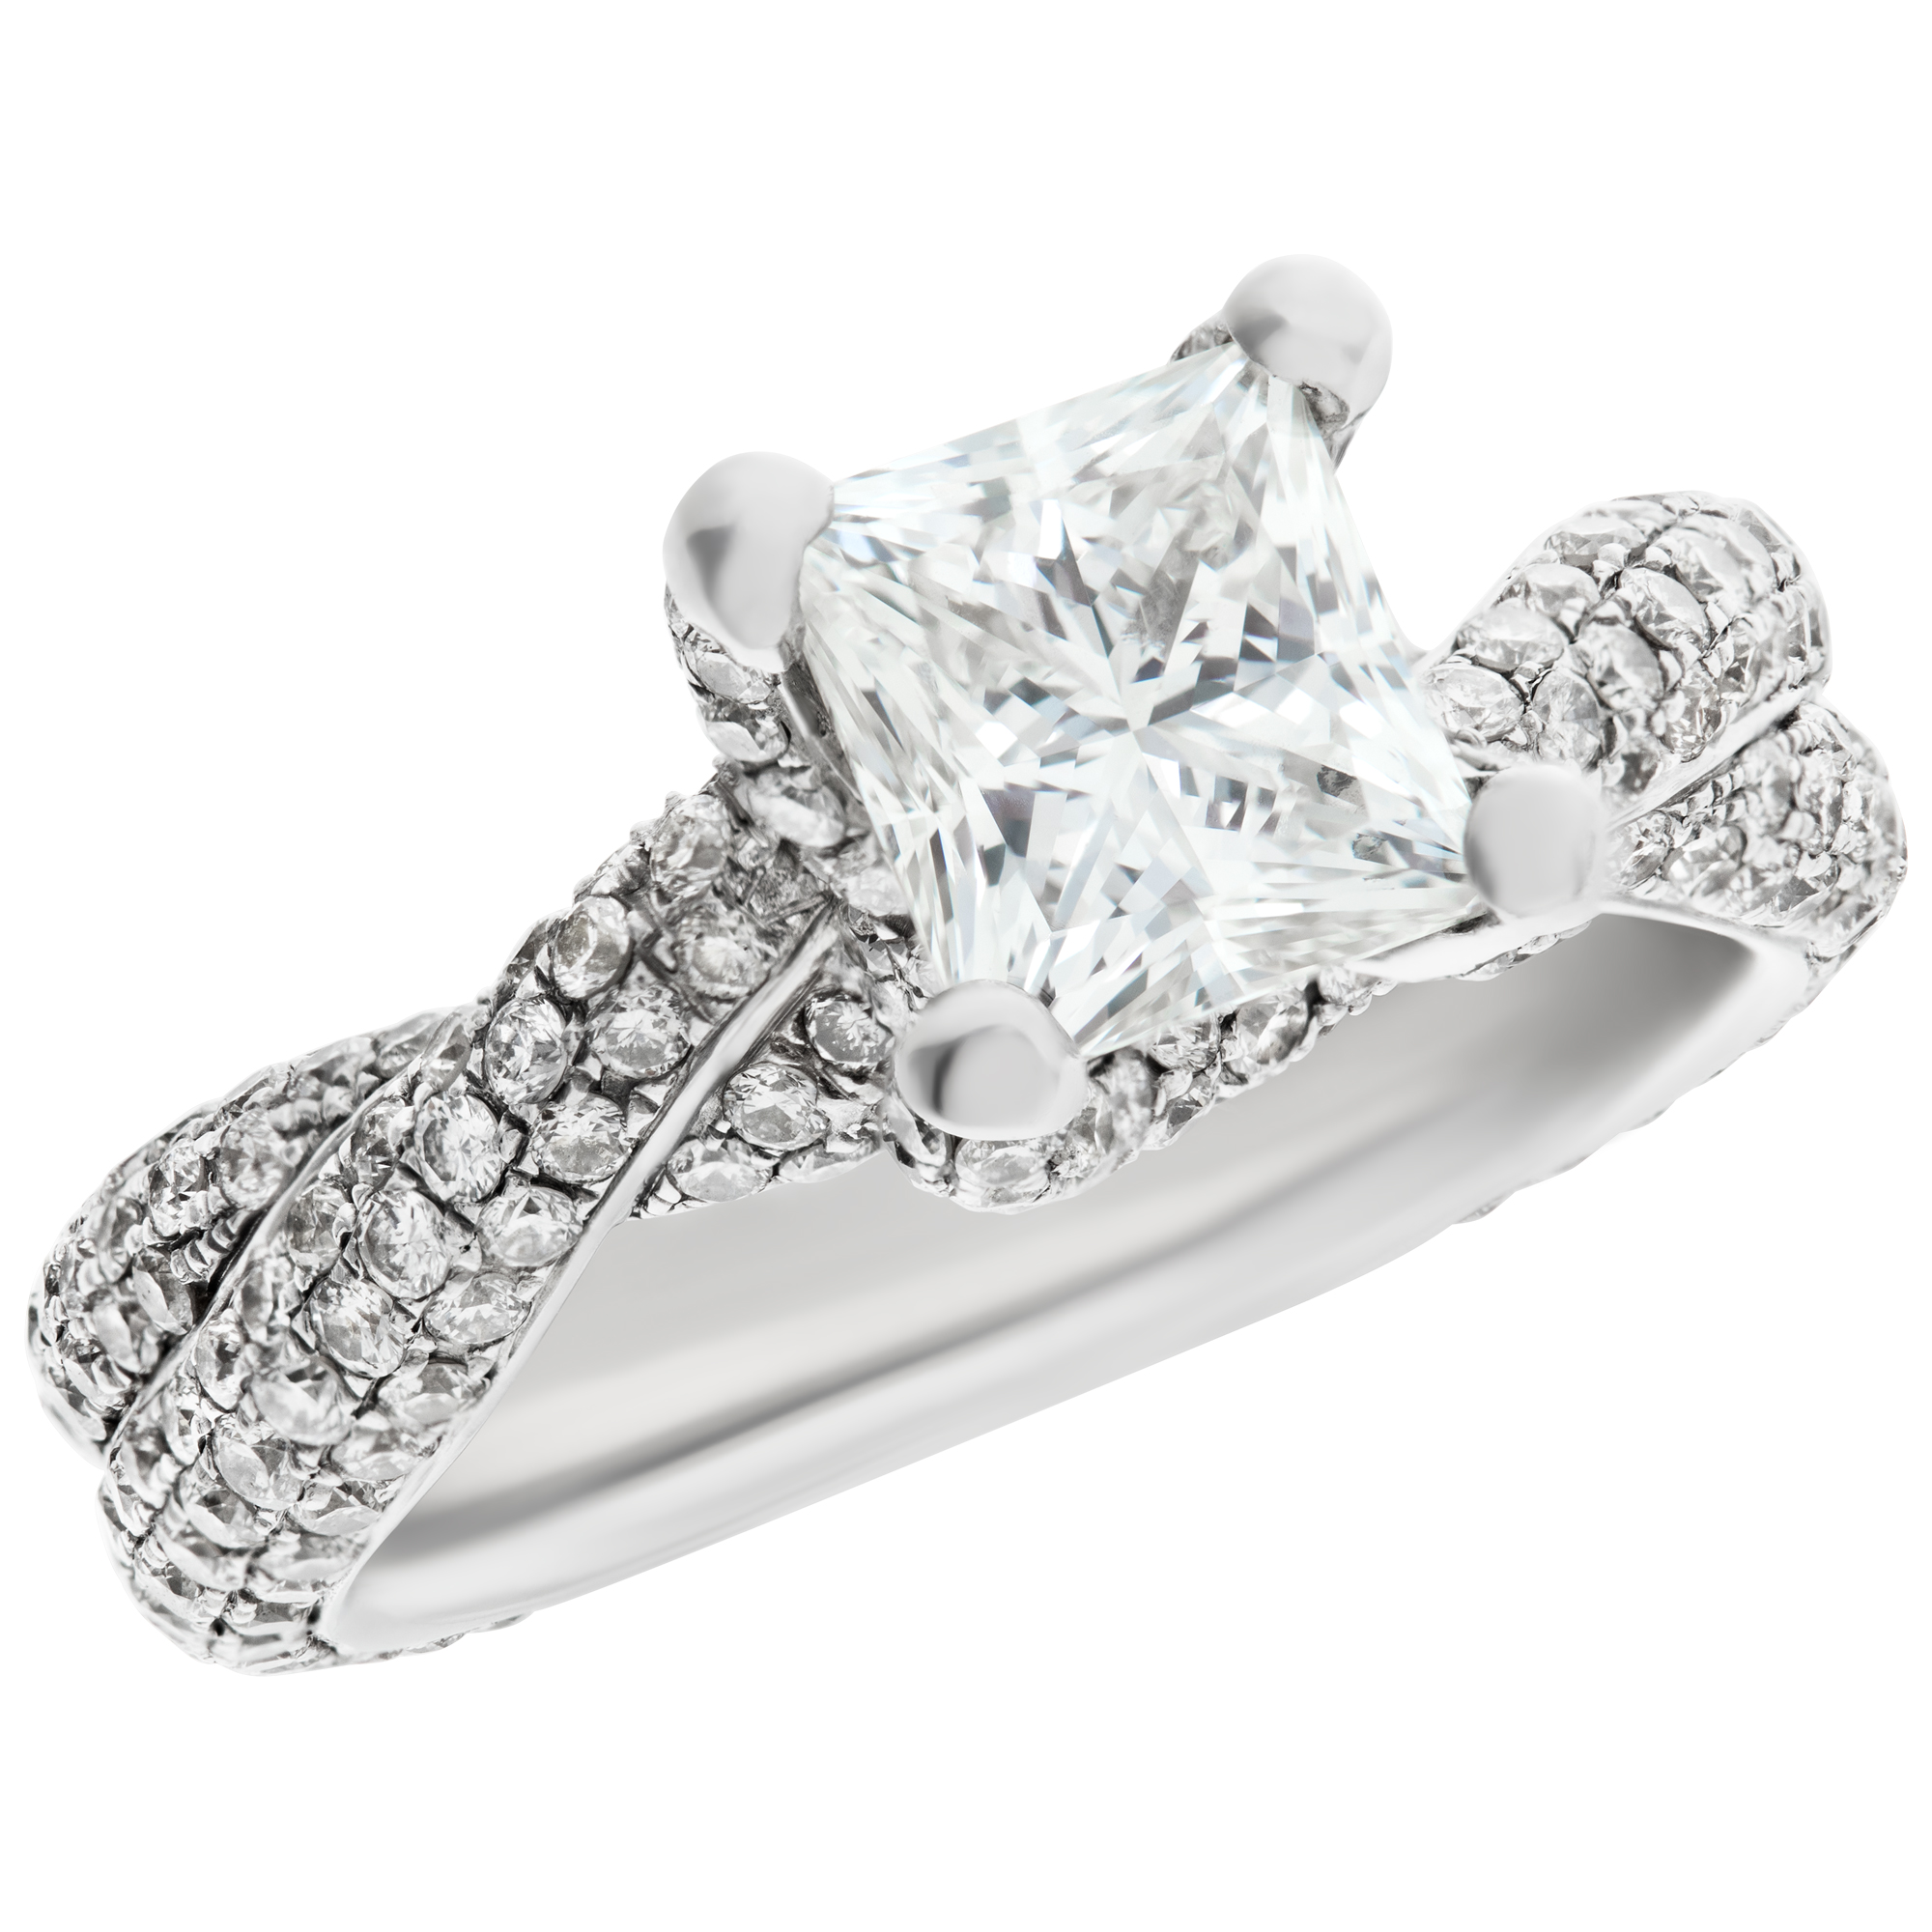 GIA certified rectangular diamond ring 1.53 cts (I Color, VS2 Clarity) set in micro pave diamond 18k white gold. image 4